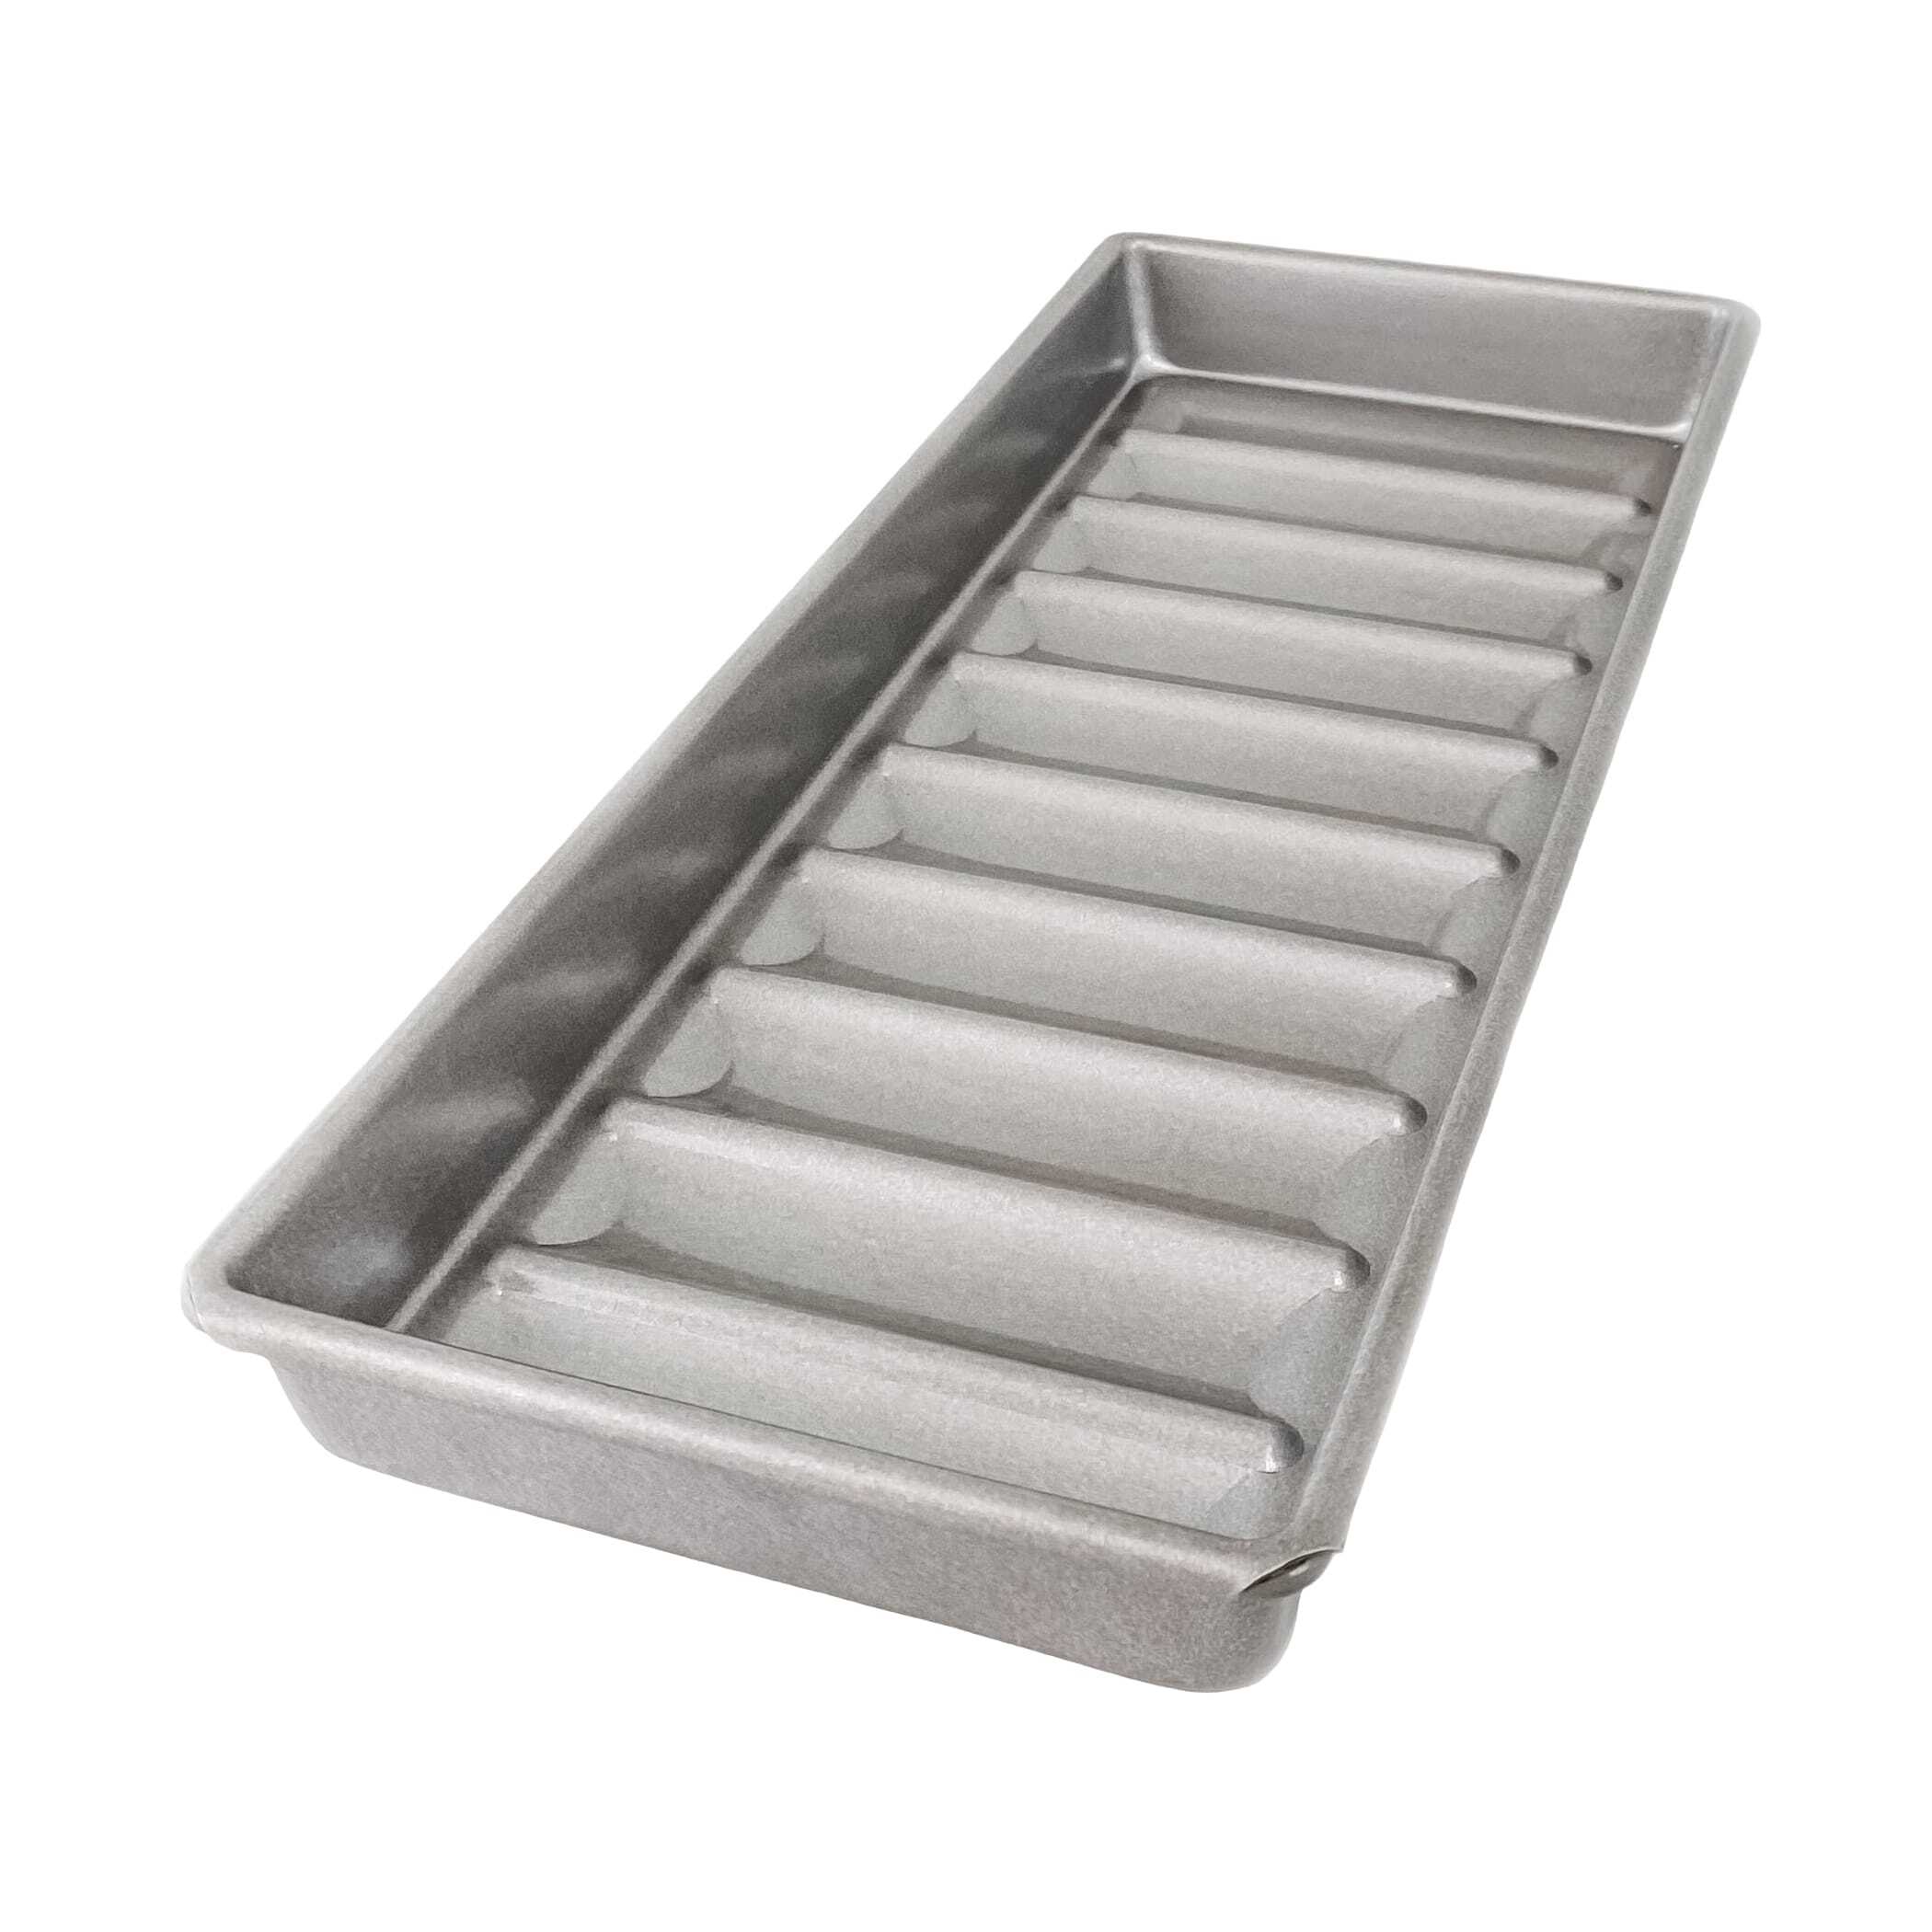 Silicone Loaf Pan Baking Pan for Baking French Baguettes/Hot Dog